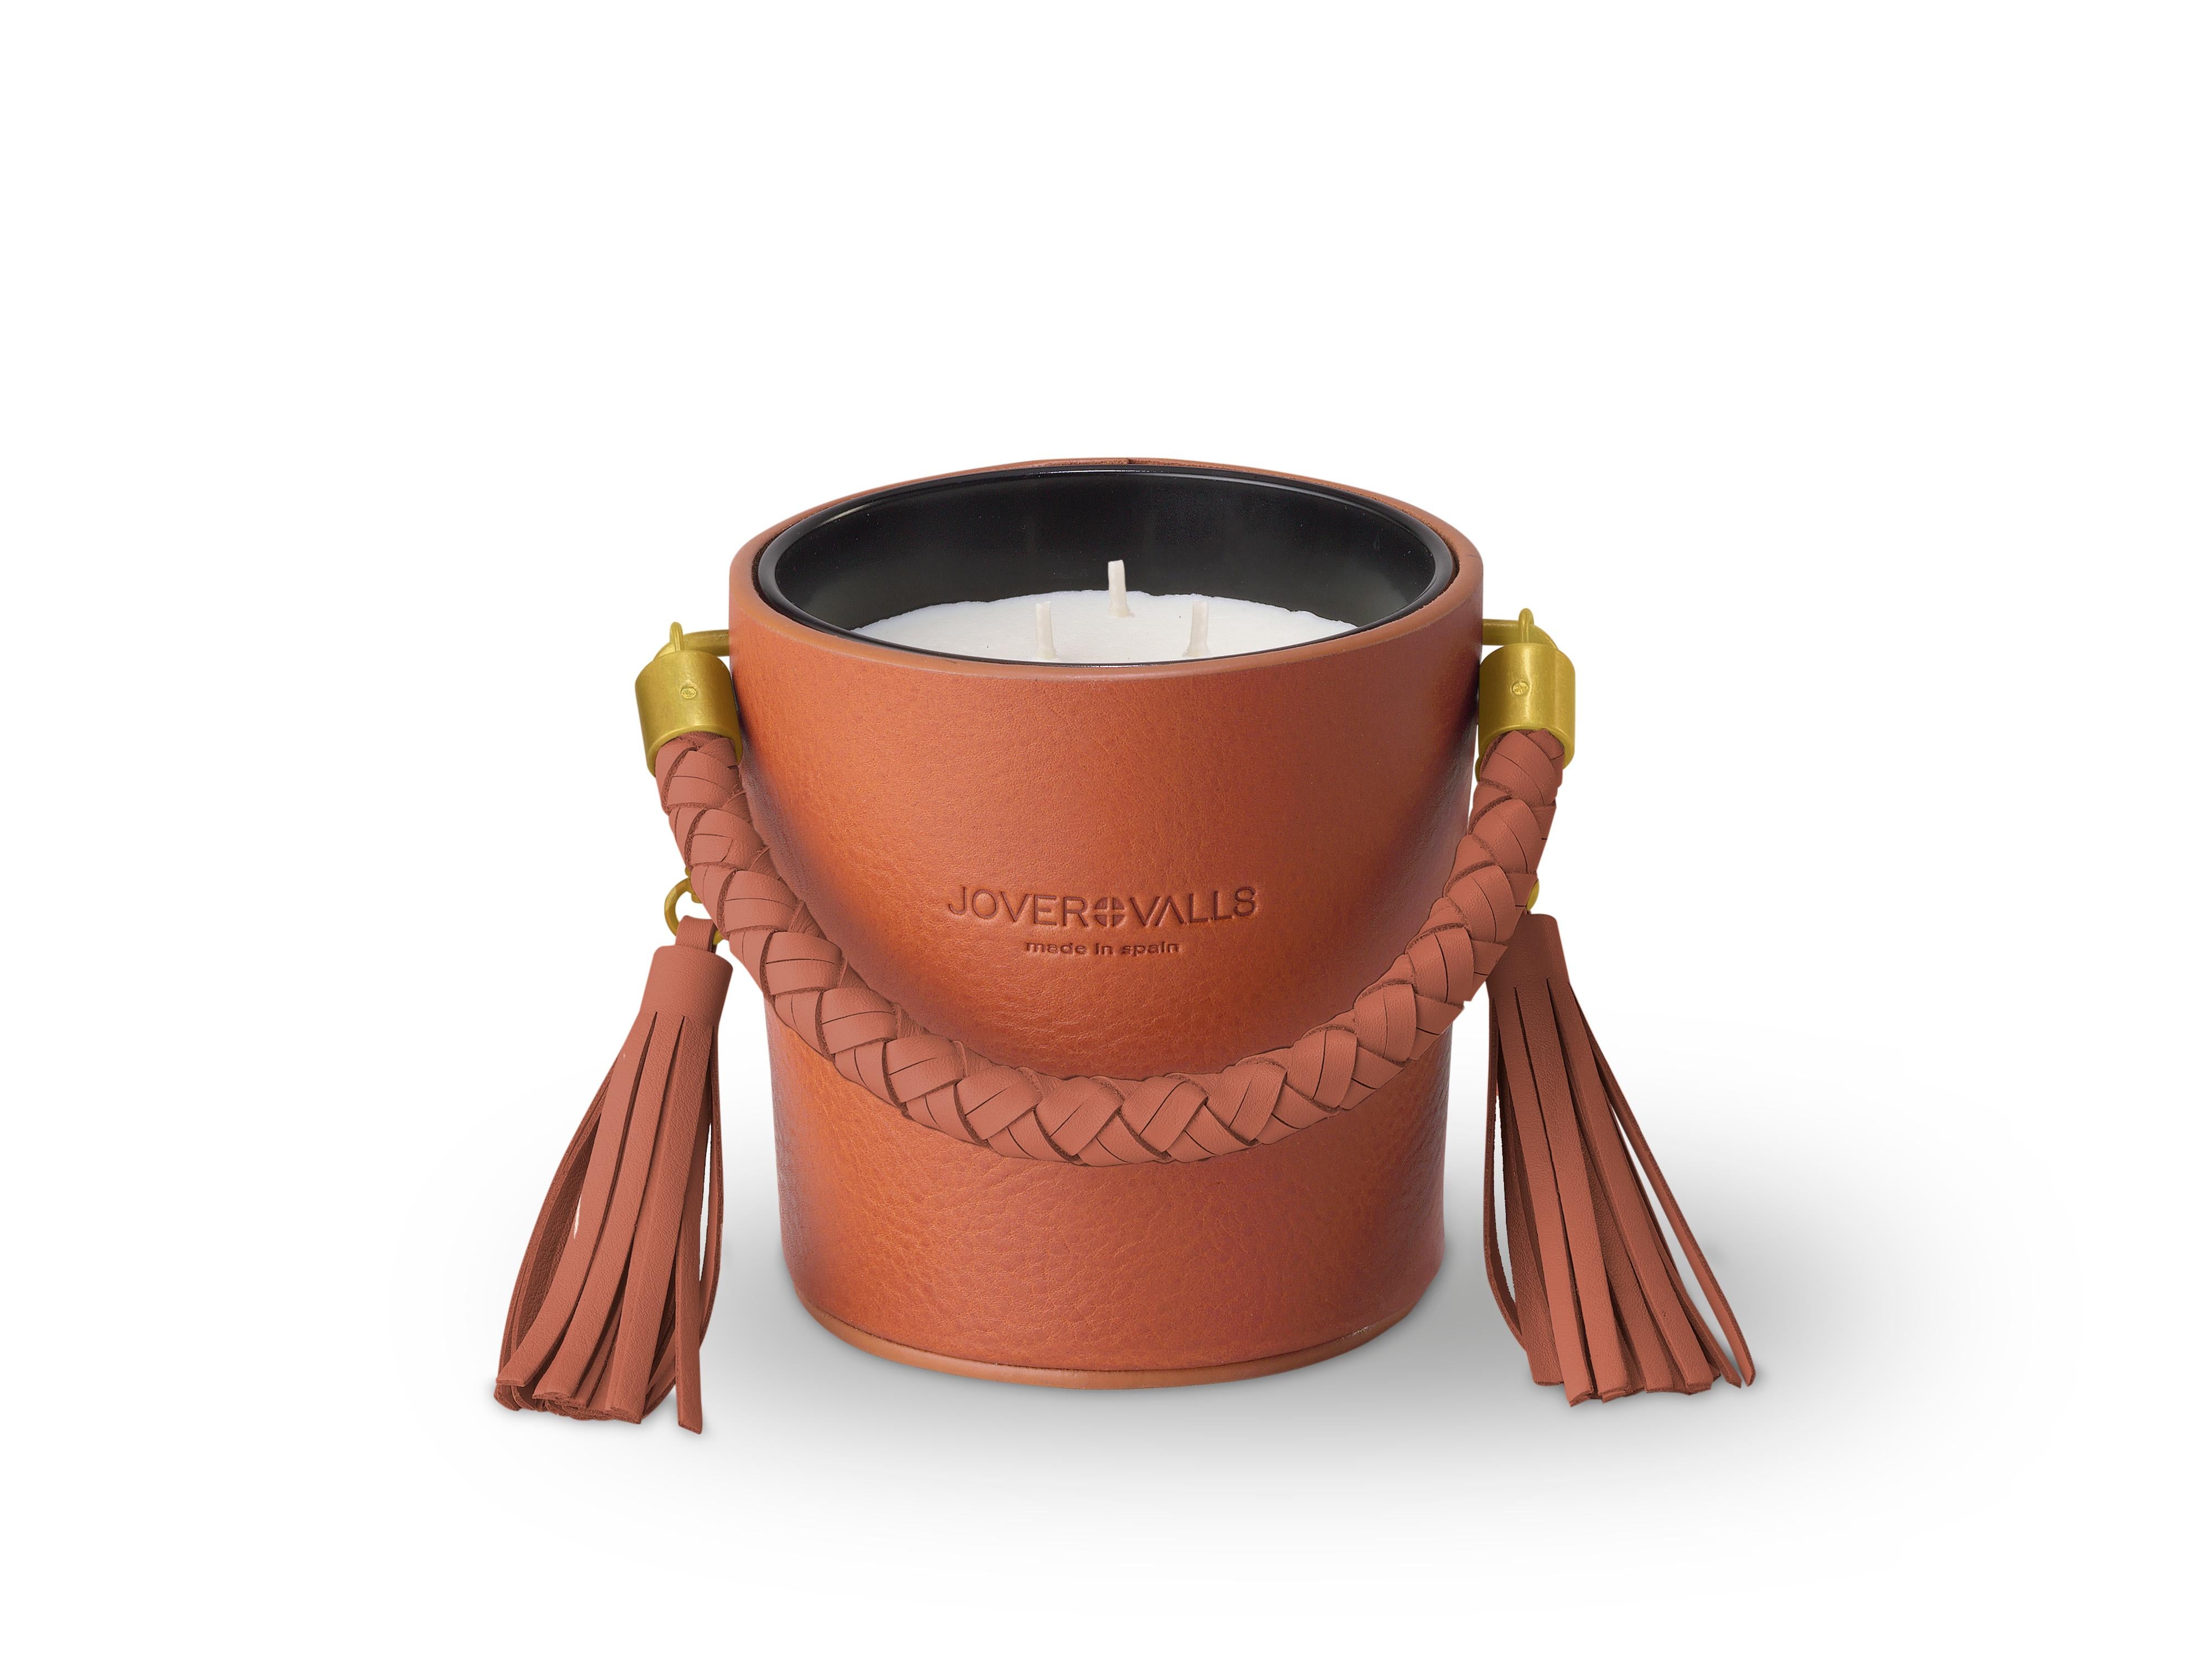 Vegetable Dyed Bucket Natural Tan Leather Candleholder, Spring Flowers & Citrus Candle 21 Oz For Sale